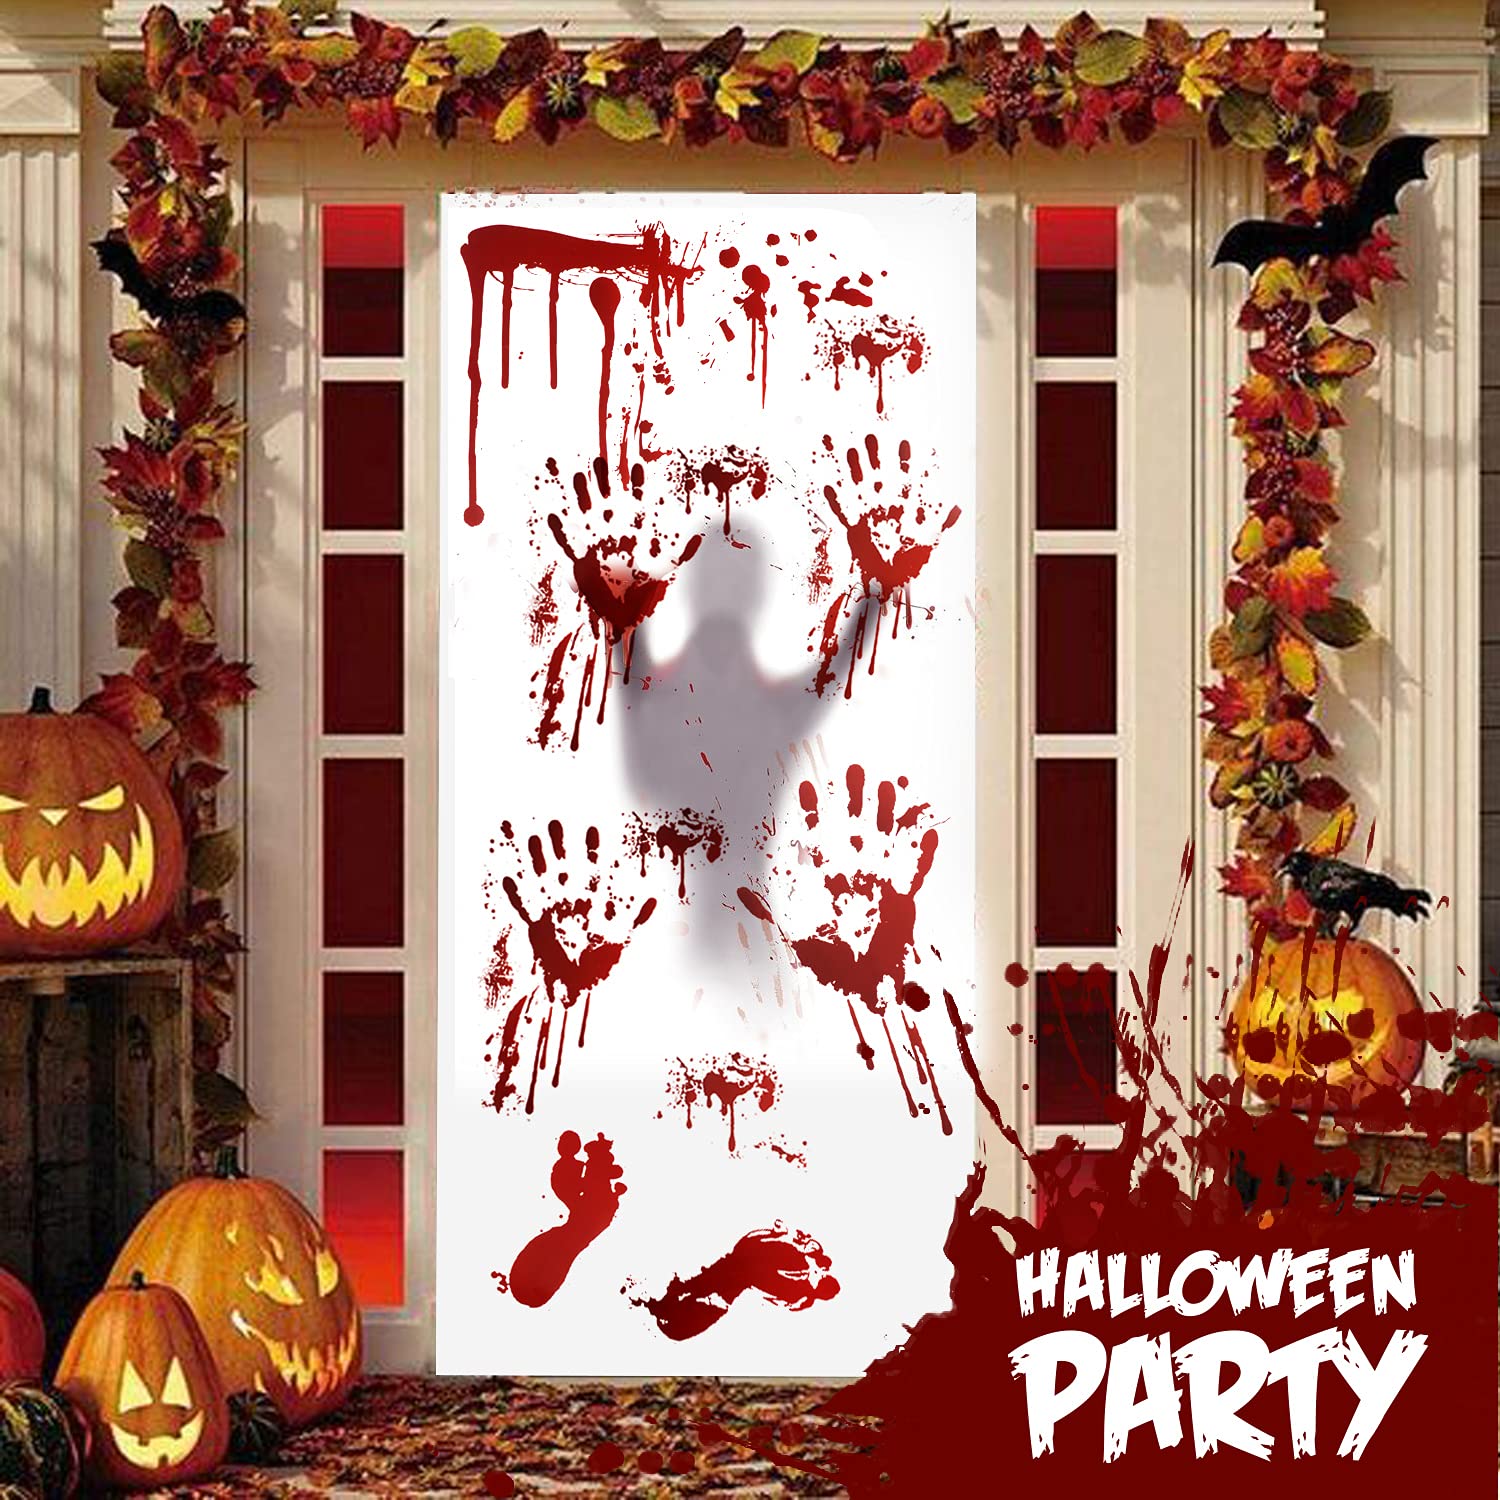 159 PCS Halloween Decorations, 8 Sheets Terror Bloody Handprint Footprint Window Stickers, 8 Sheets Tattoo Stickers, Halloween Party Indoor/Outdoor Decoration,Spooky Wall Decal and Floor Stickers